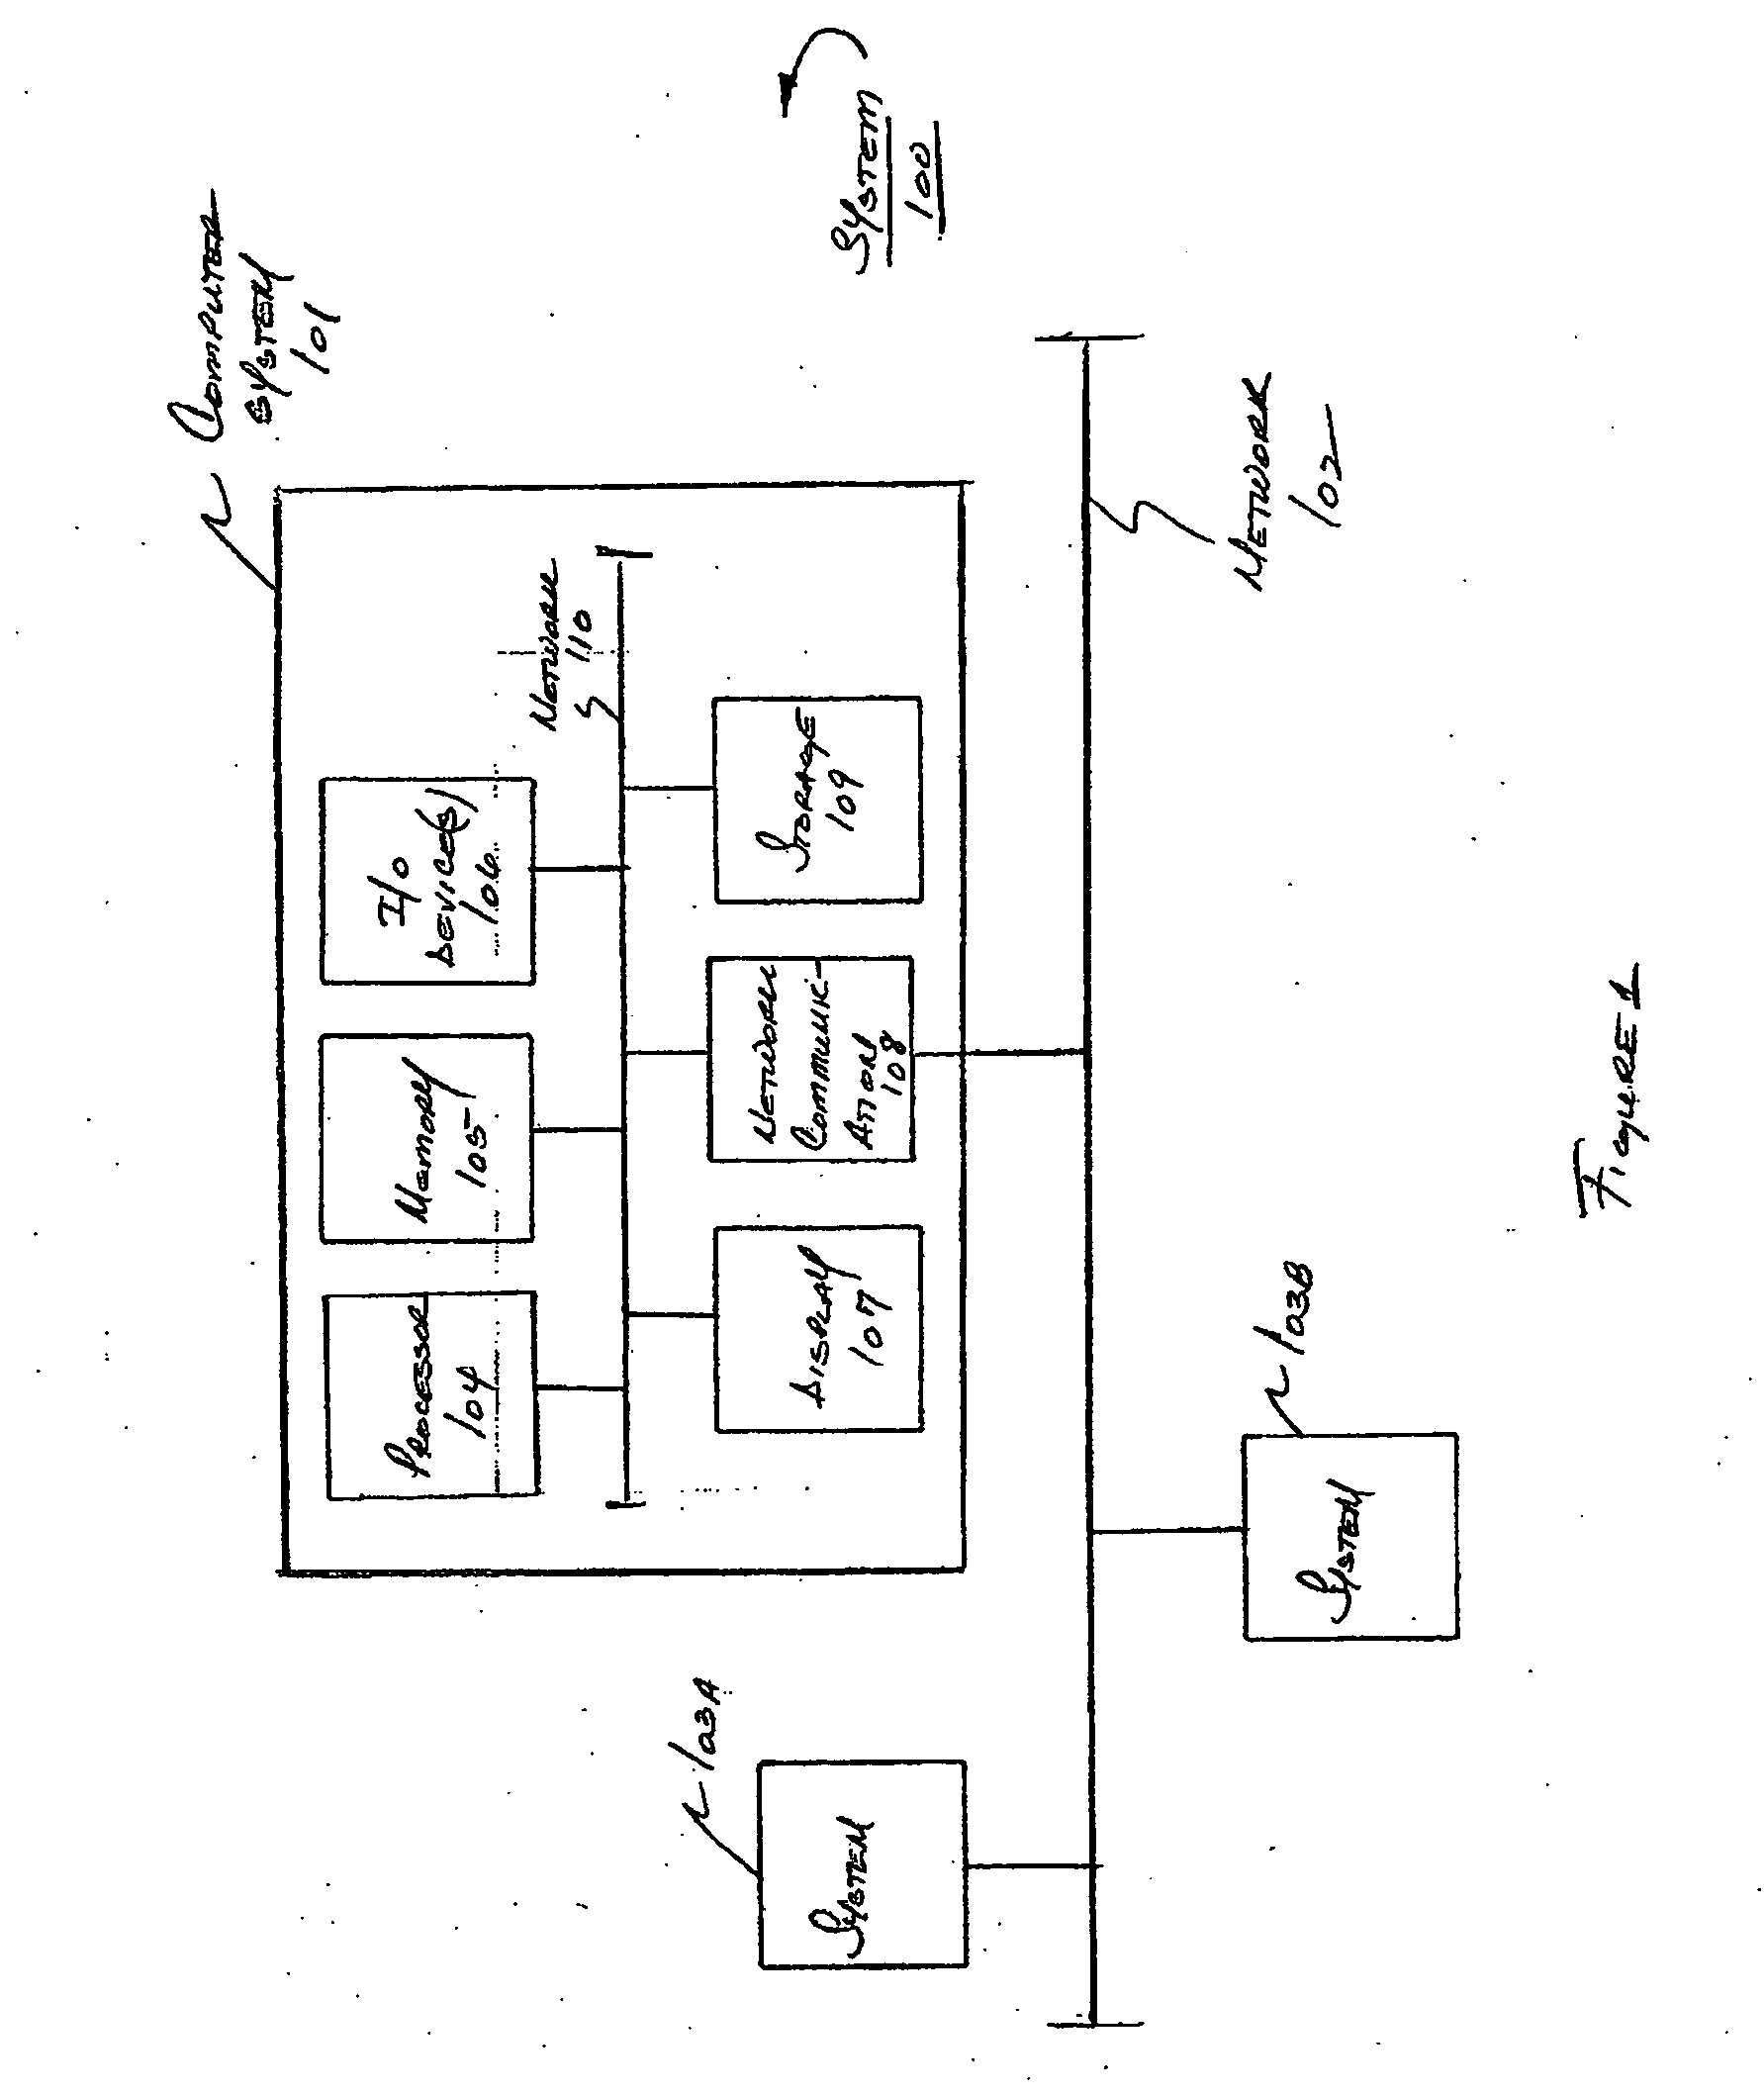 System and method for selecting advertising